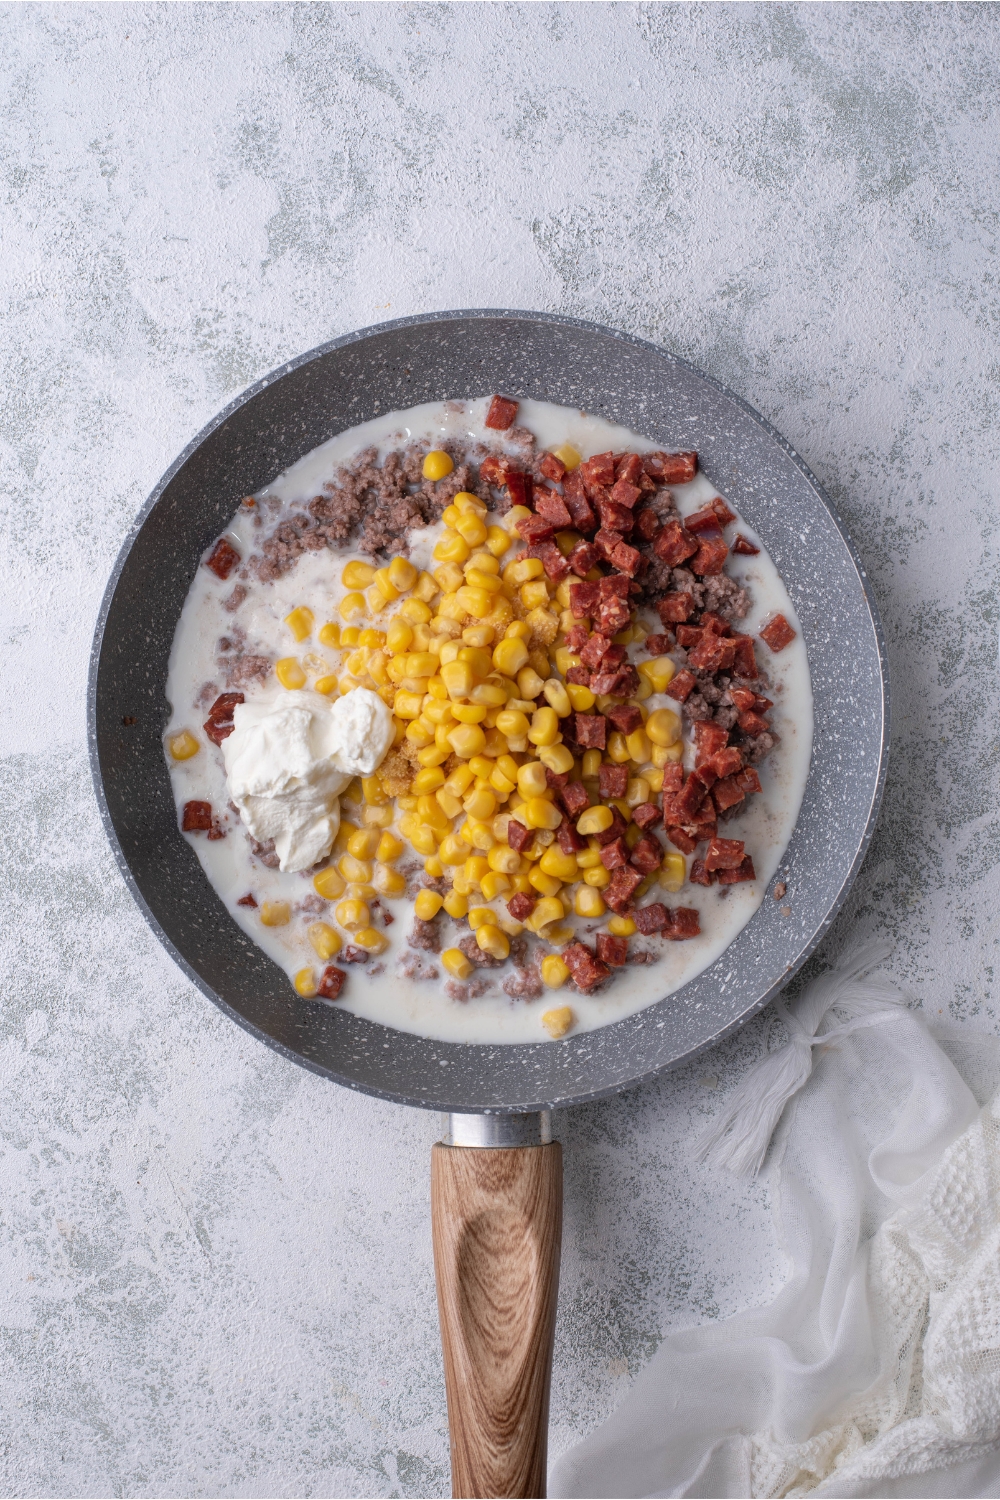 Skillet filled with cooked ground beef, diced chorizo, corn, and sour cream in a creamy soup mixture.